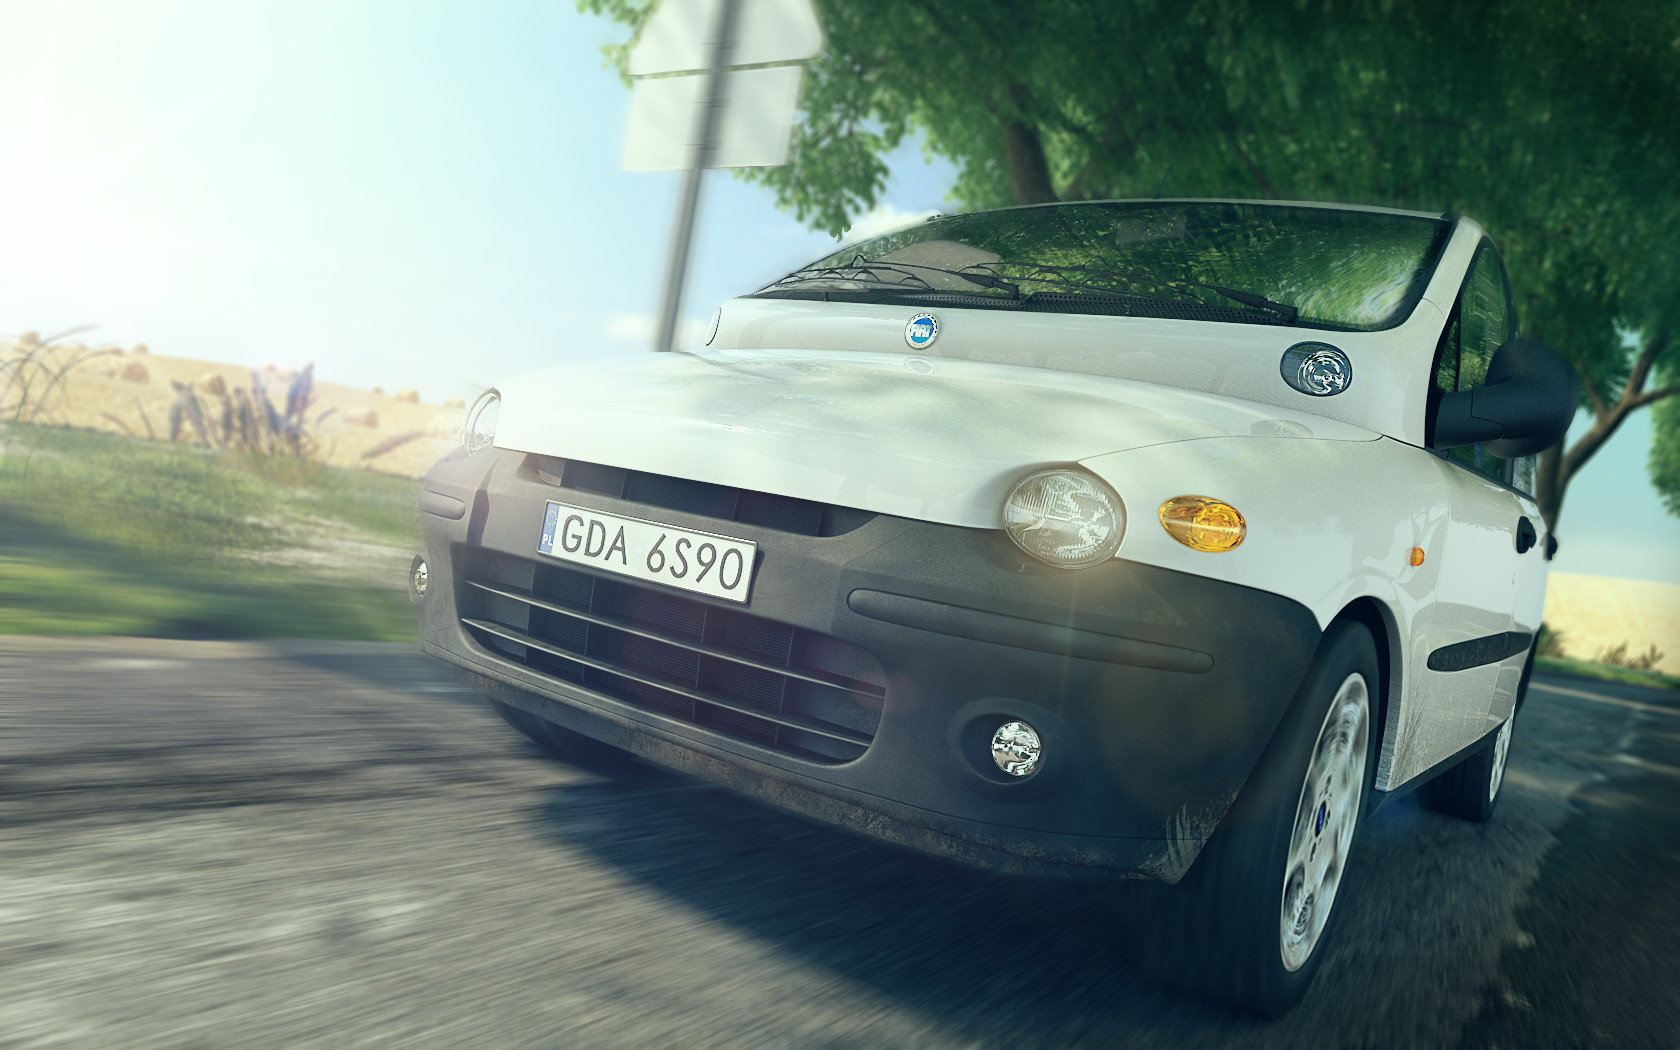 Fiat Multipla Wallpapers